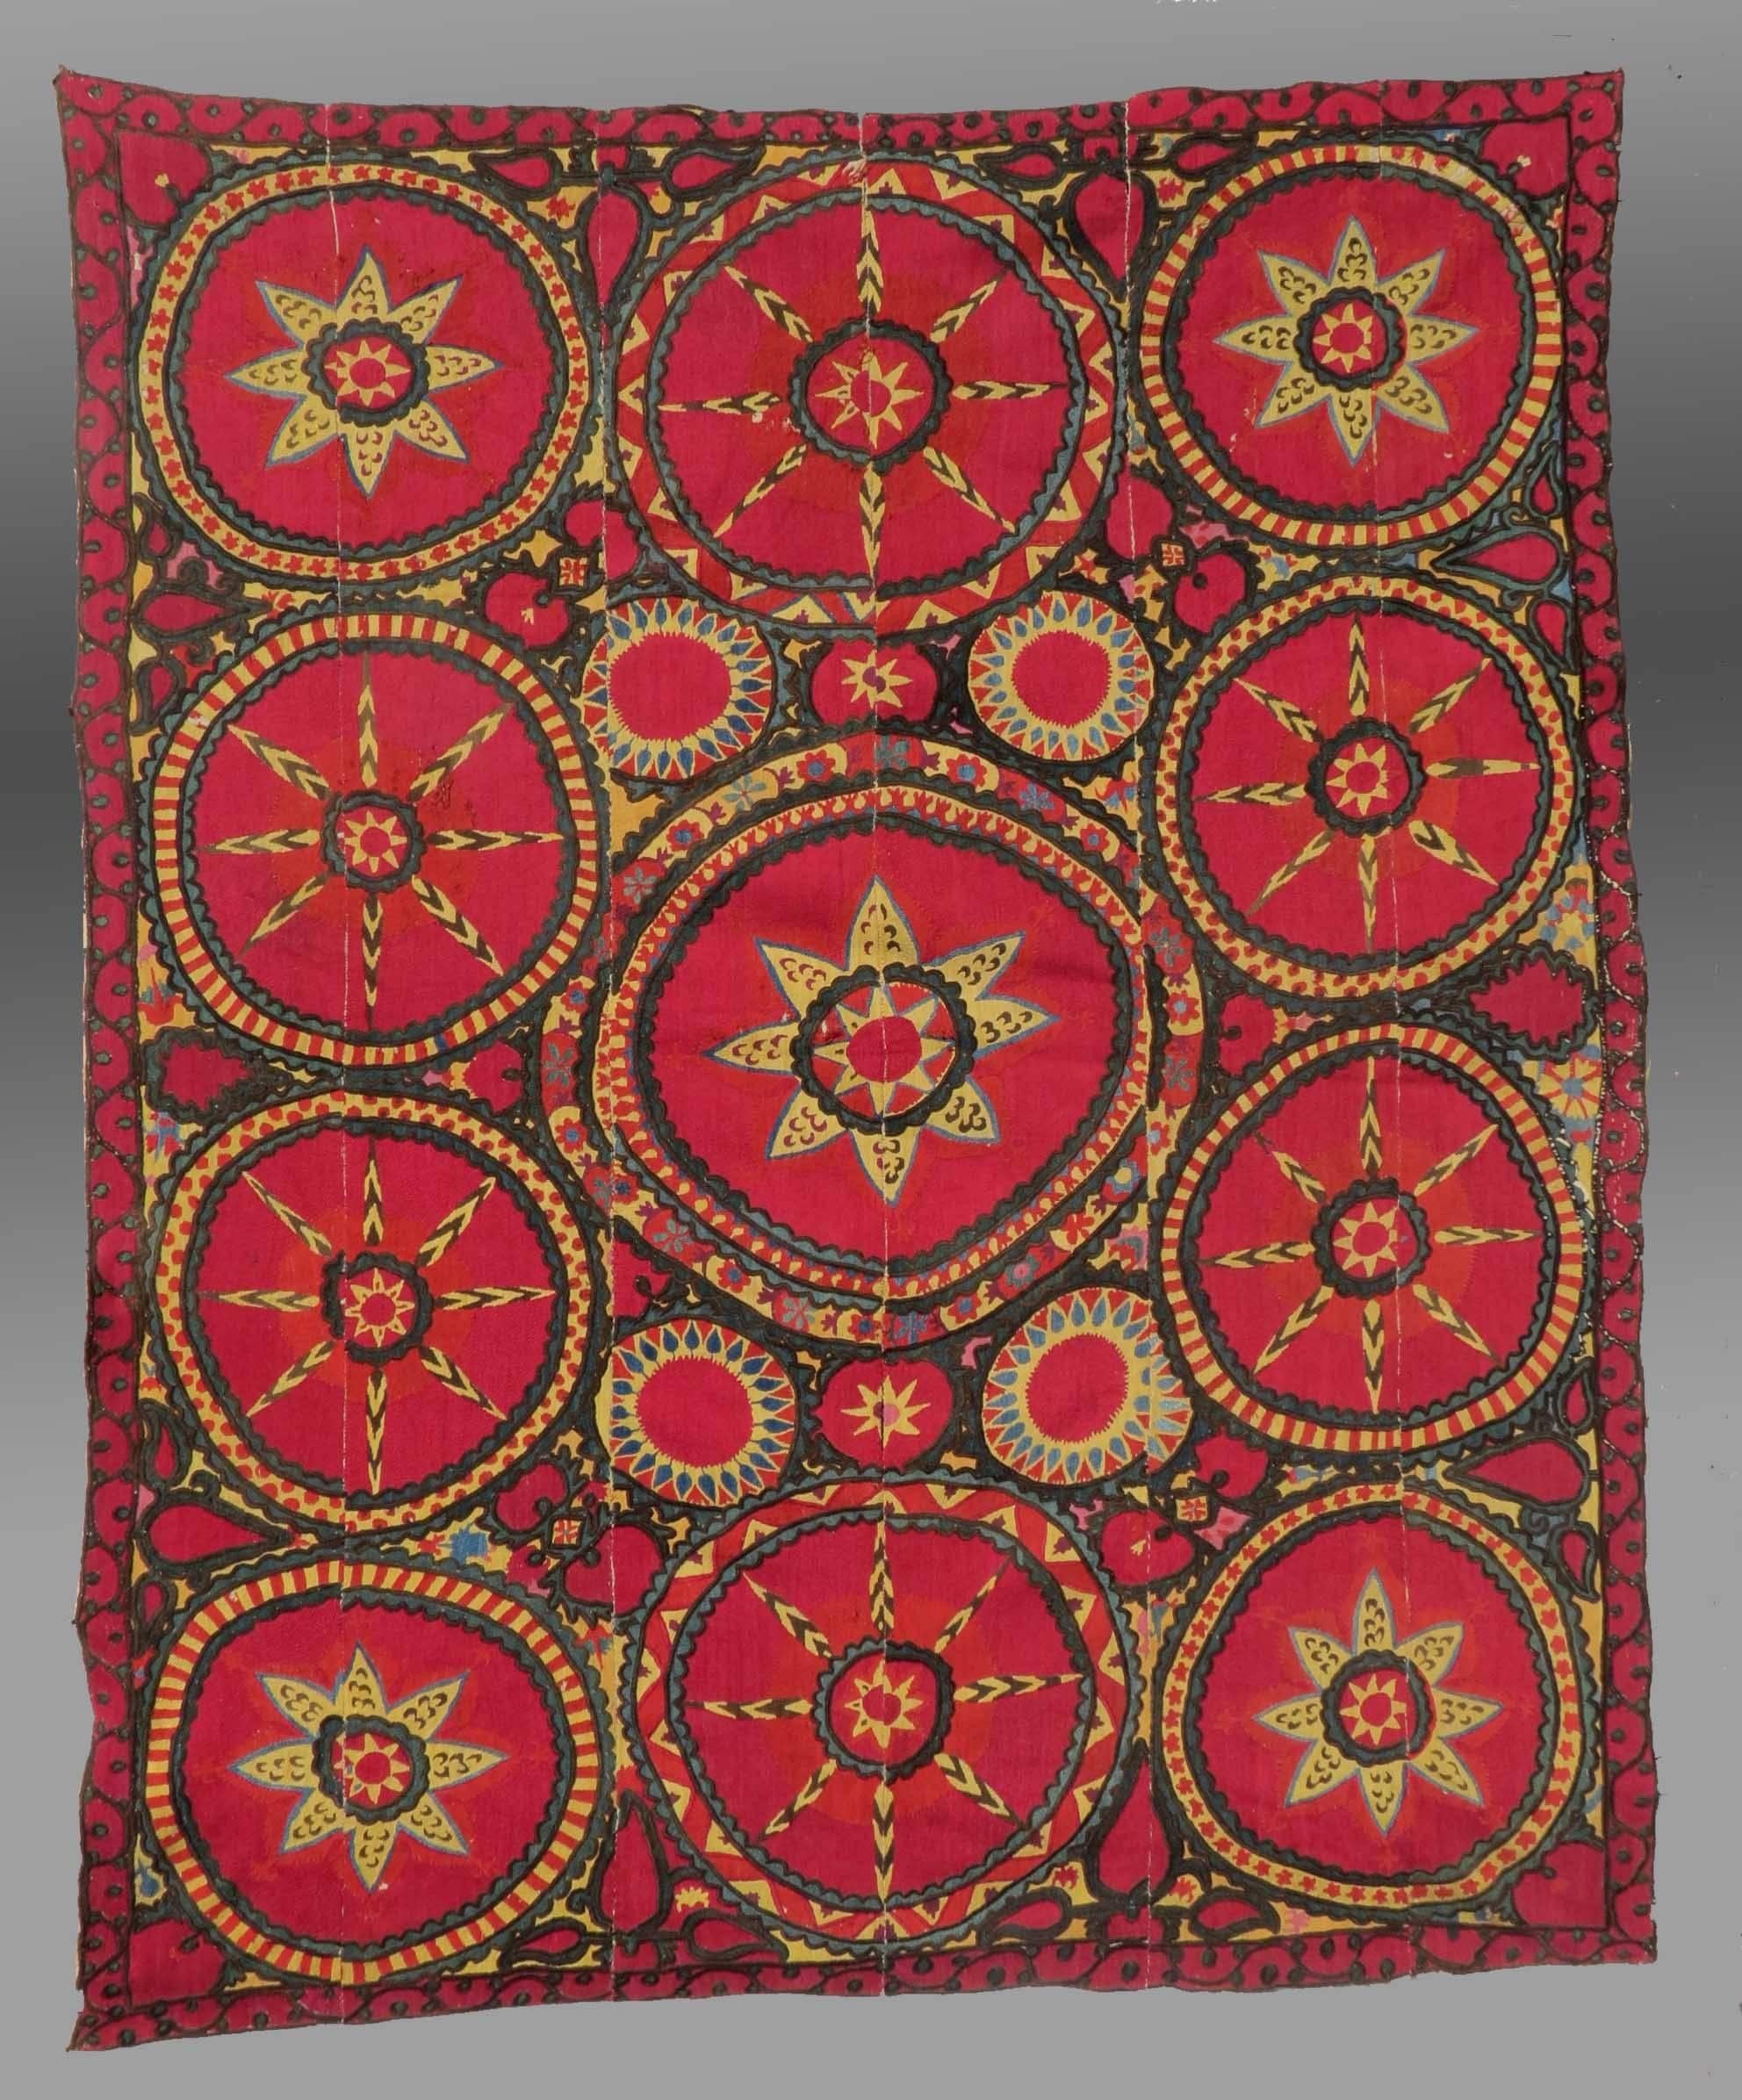 Tribal Antique Uzbek Embroidery Bed Cover or Wall Hanging, 19th Century For Sale